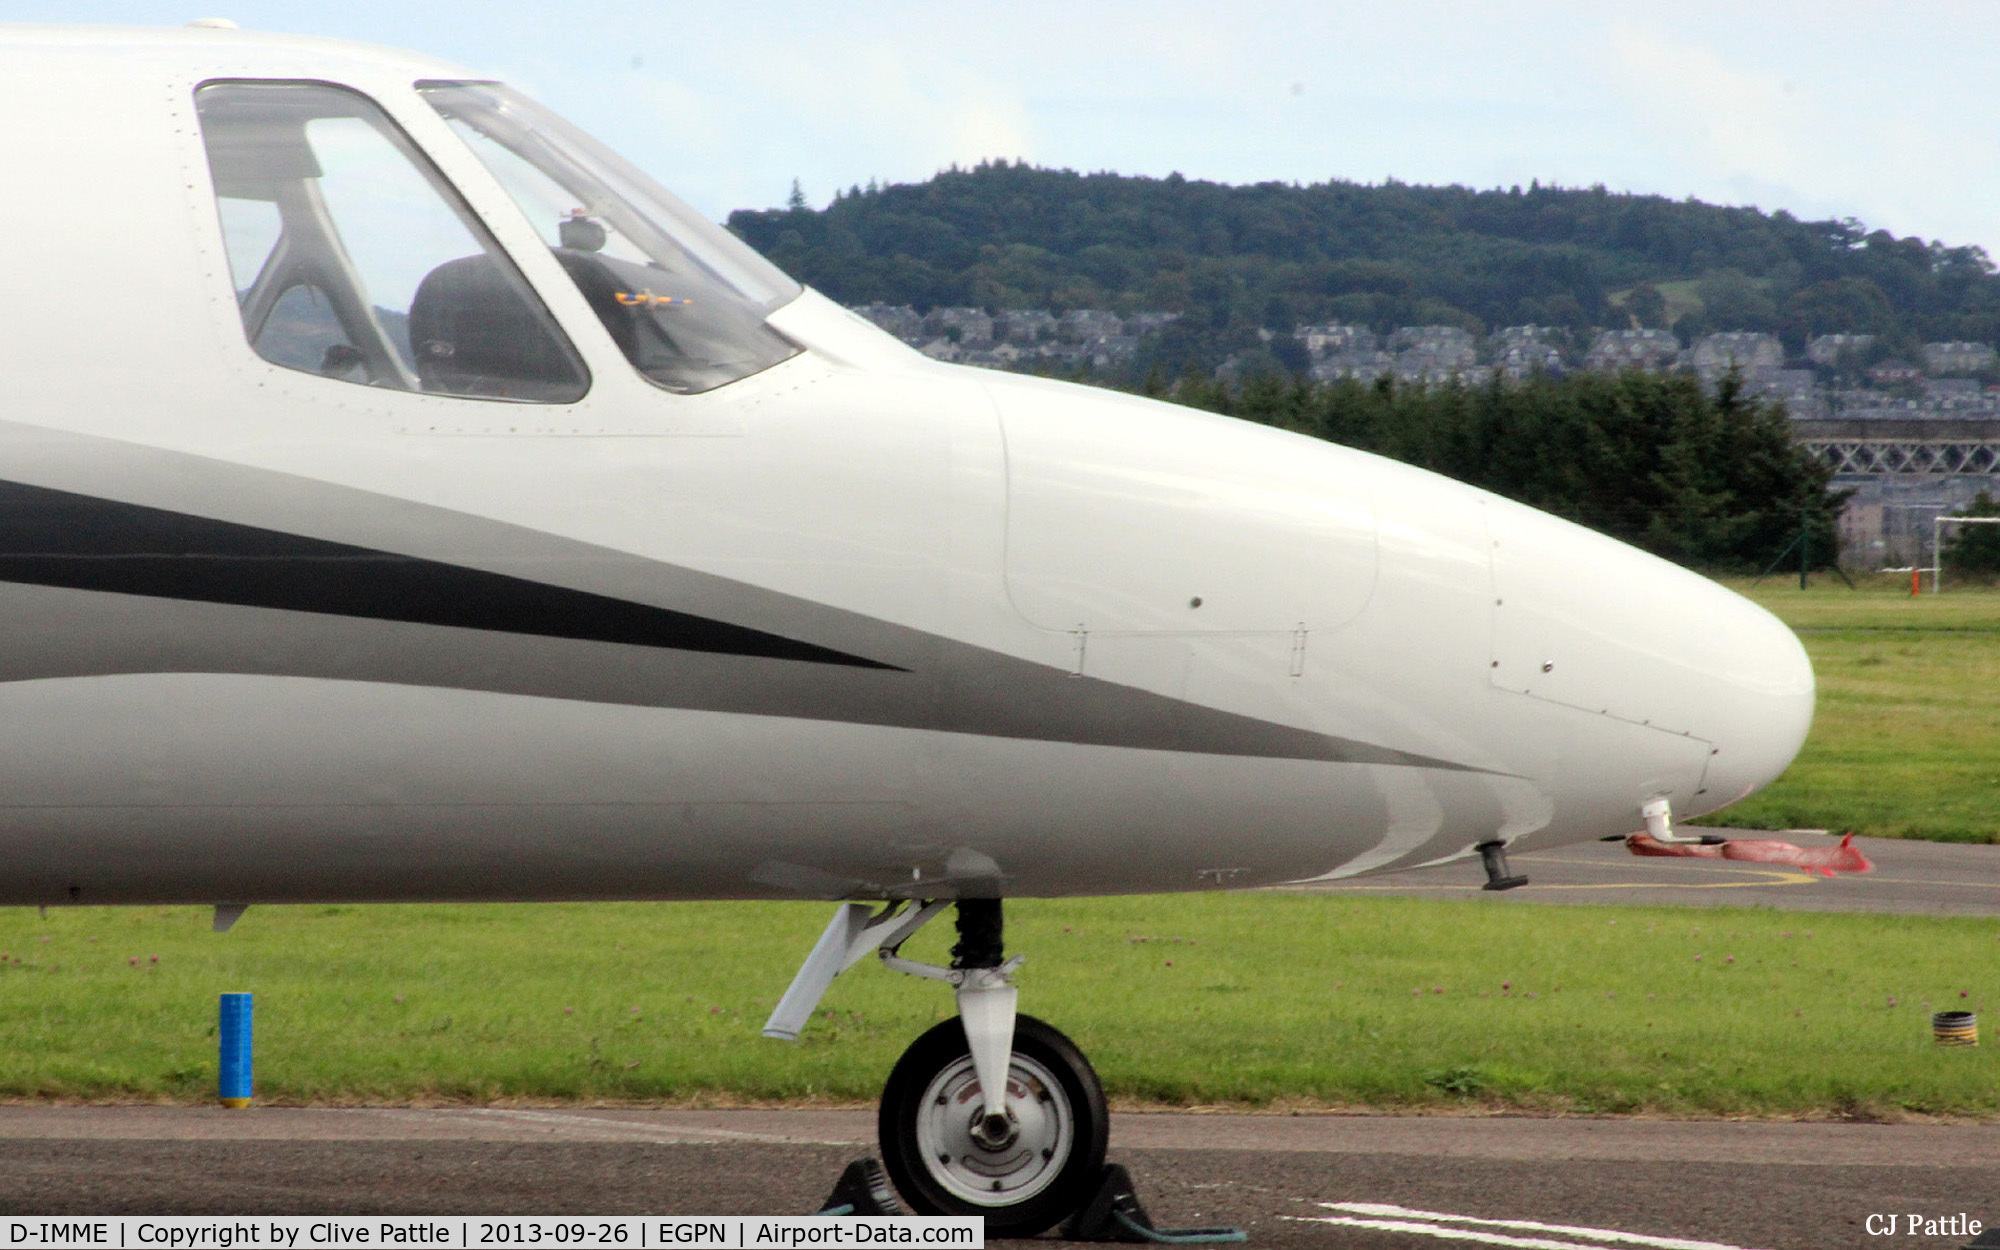 D-IMME, 1999 Cessna 551 Citation II/SP C/N 551-0400, Close up nose detail at Dundee